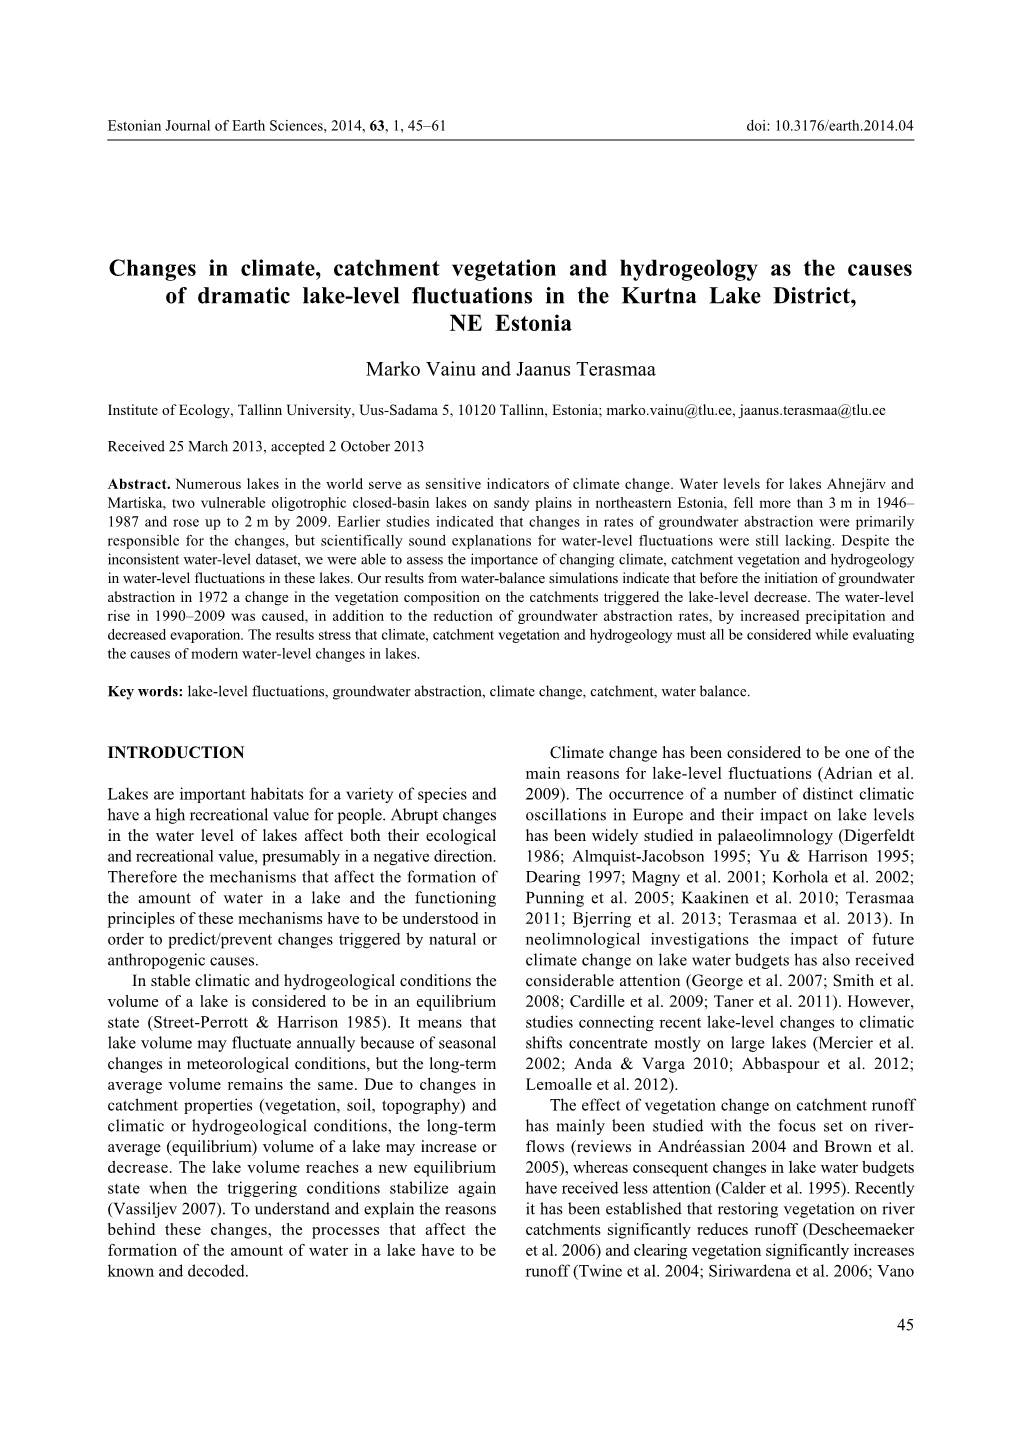 Changes in Climate, Catchment Vegetation and Hydrogeology As the Causes of Dramatic Lake-Level Fluctuations in the Kurtna Lake District, NE Estonia